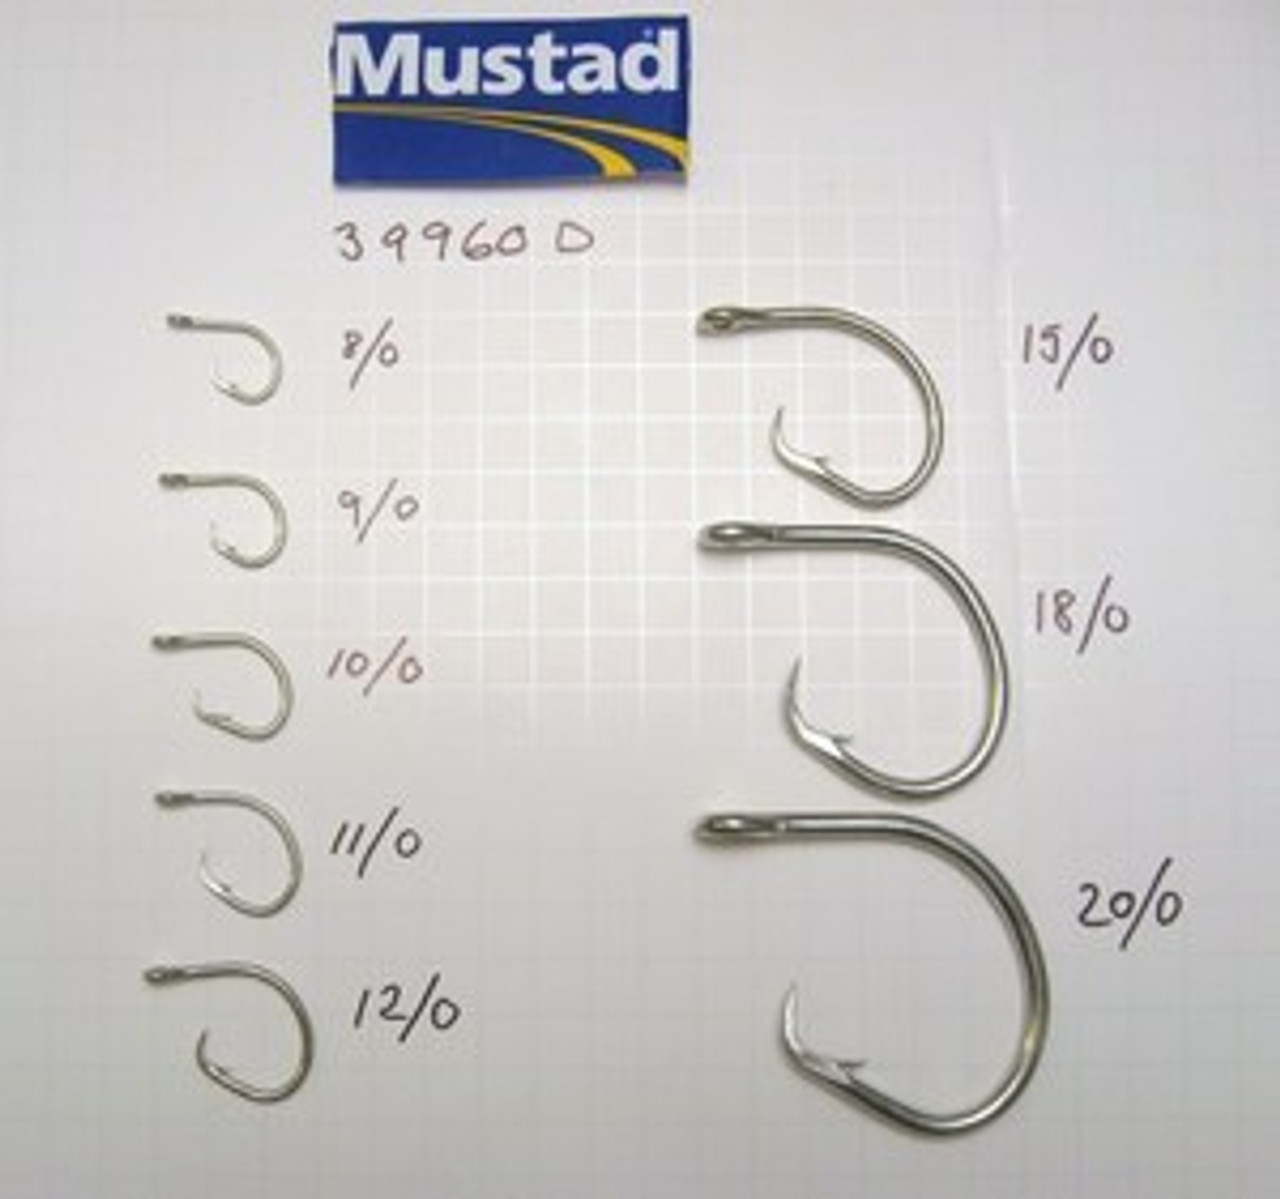 MUSTAD 39960D CIRCLE-Ringed eye Duratin Available in bags of 25 - 8/0-20/0  